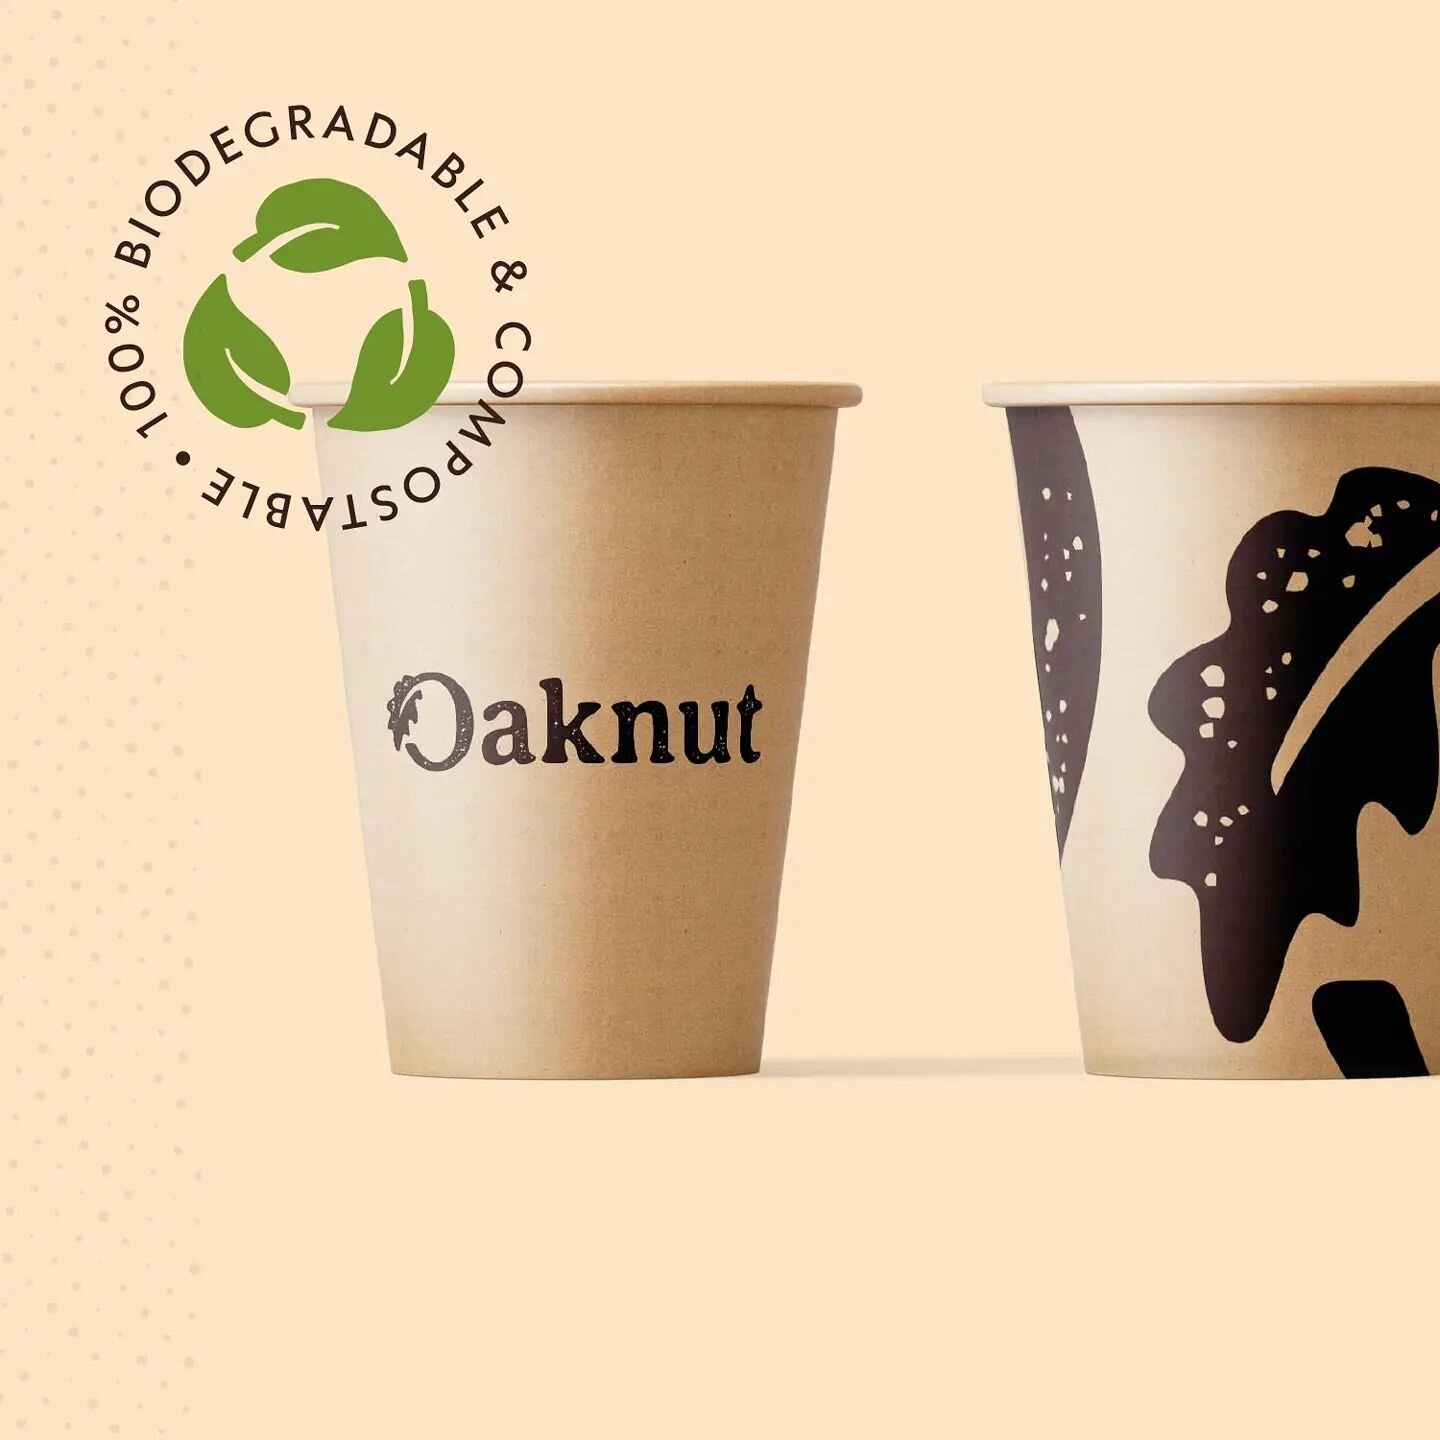 Oaknut - Brand Identity &amp; Packaging Design. 

A hand-roasted caffeine-free hot drink made from 100% acorn; a natural &amp; sustainable alternative to tea and coffee. 3/3

Oaknut: @oaknut_living
Photography: @tristanphotography.co.uk
Labels: @the_